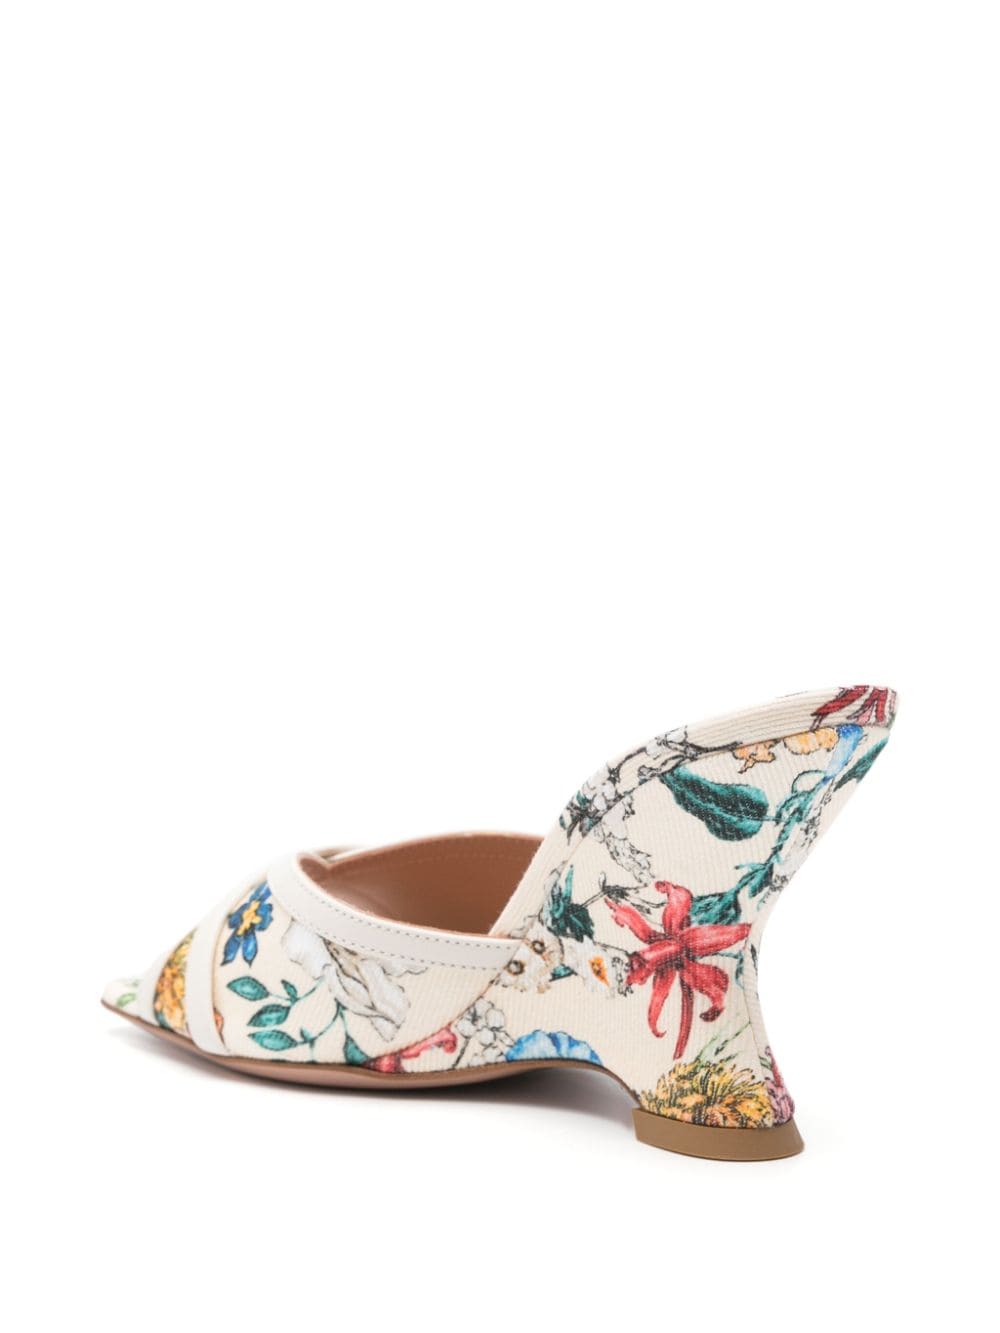 Malone Souliers MALONE SOULIERS- Perla Wedge 85 Printed Canvas Mules